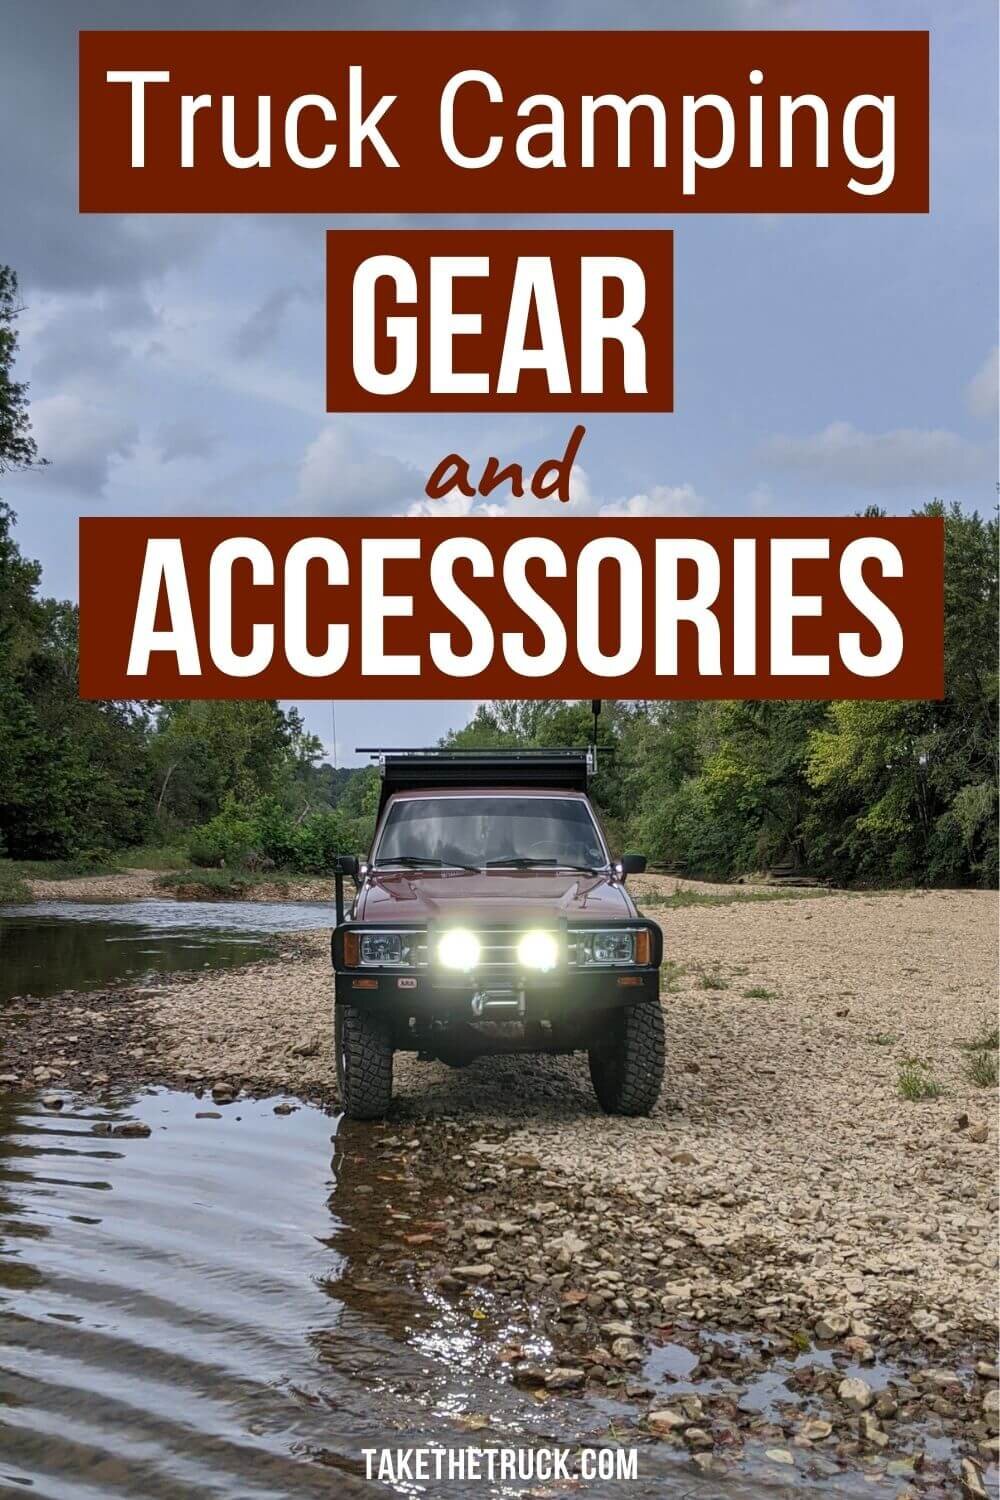 Truck Camping Gear and Accessories